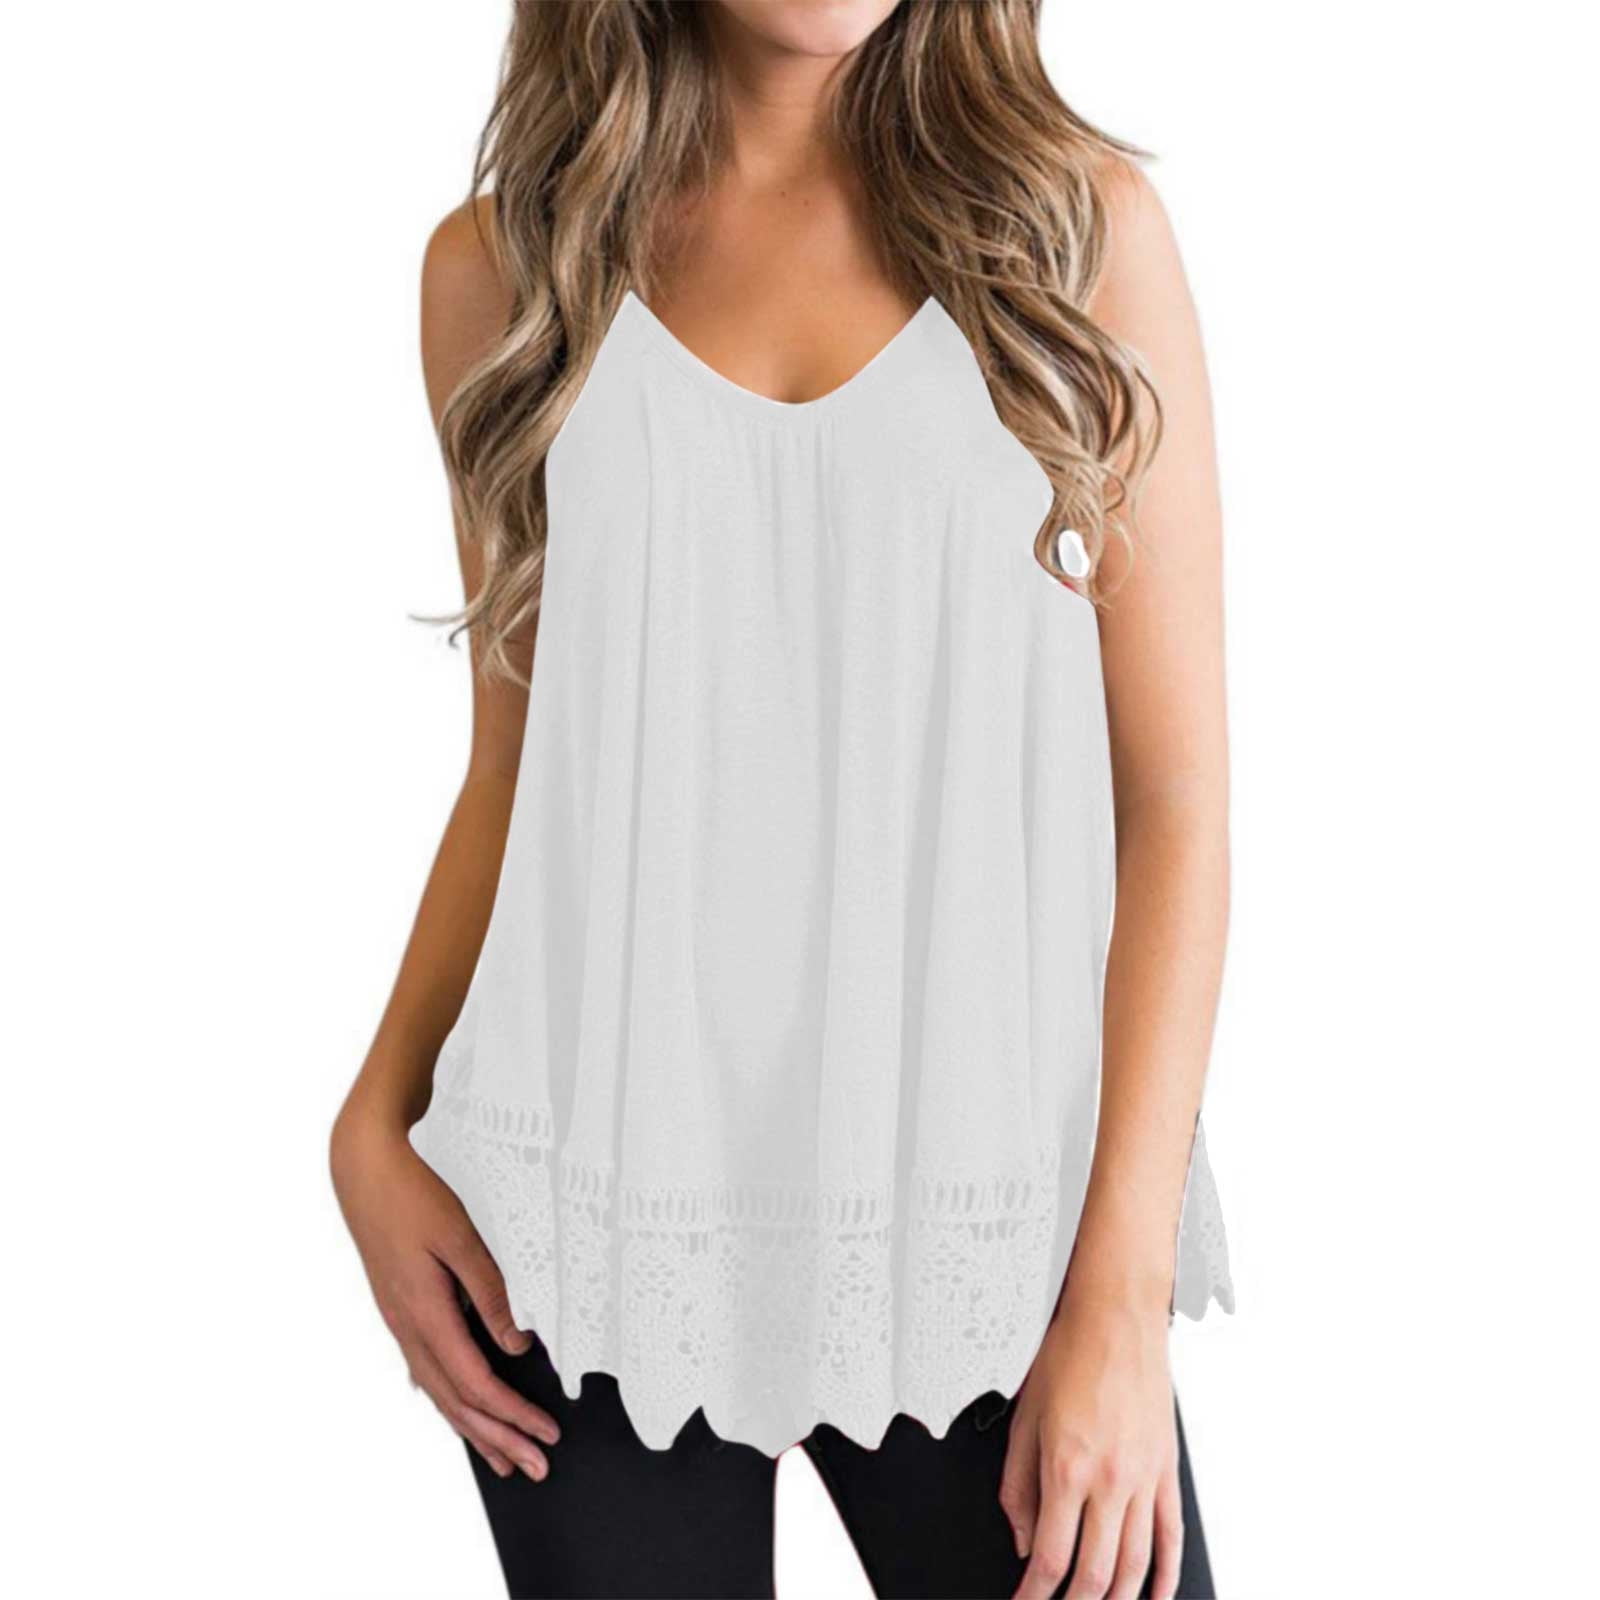 Buy Plus Size Swing Lace Flowy Tank Top for Women, A01 White, 3X at